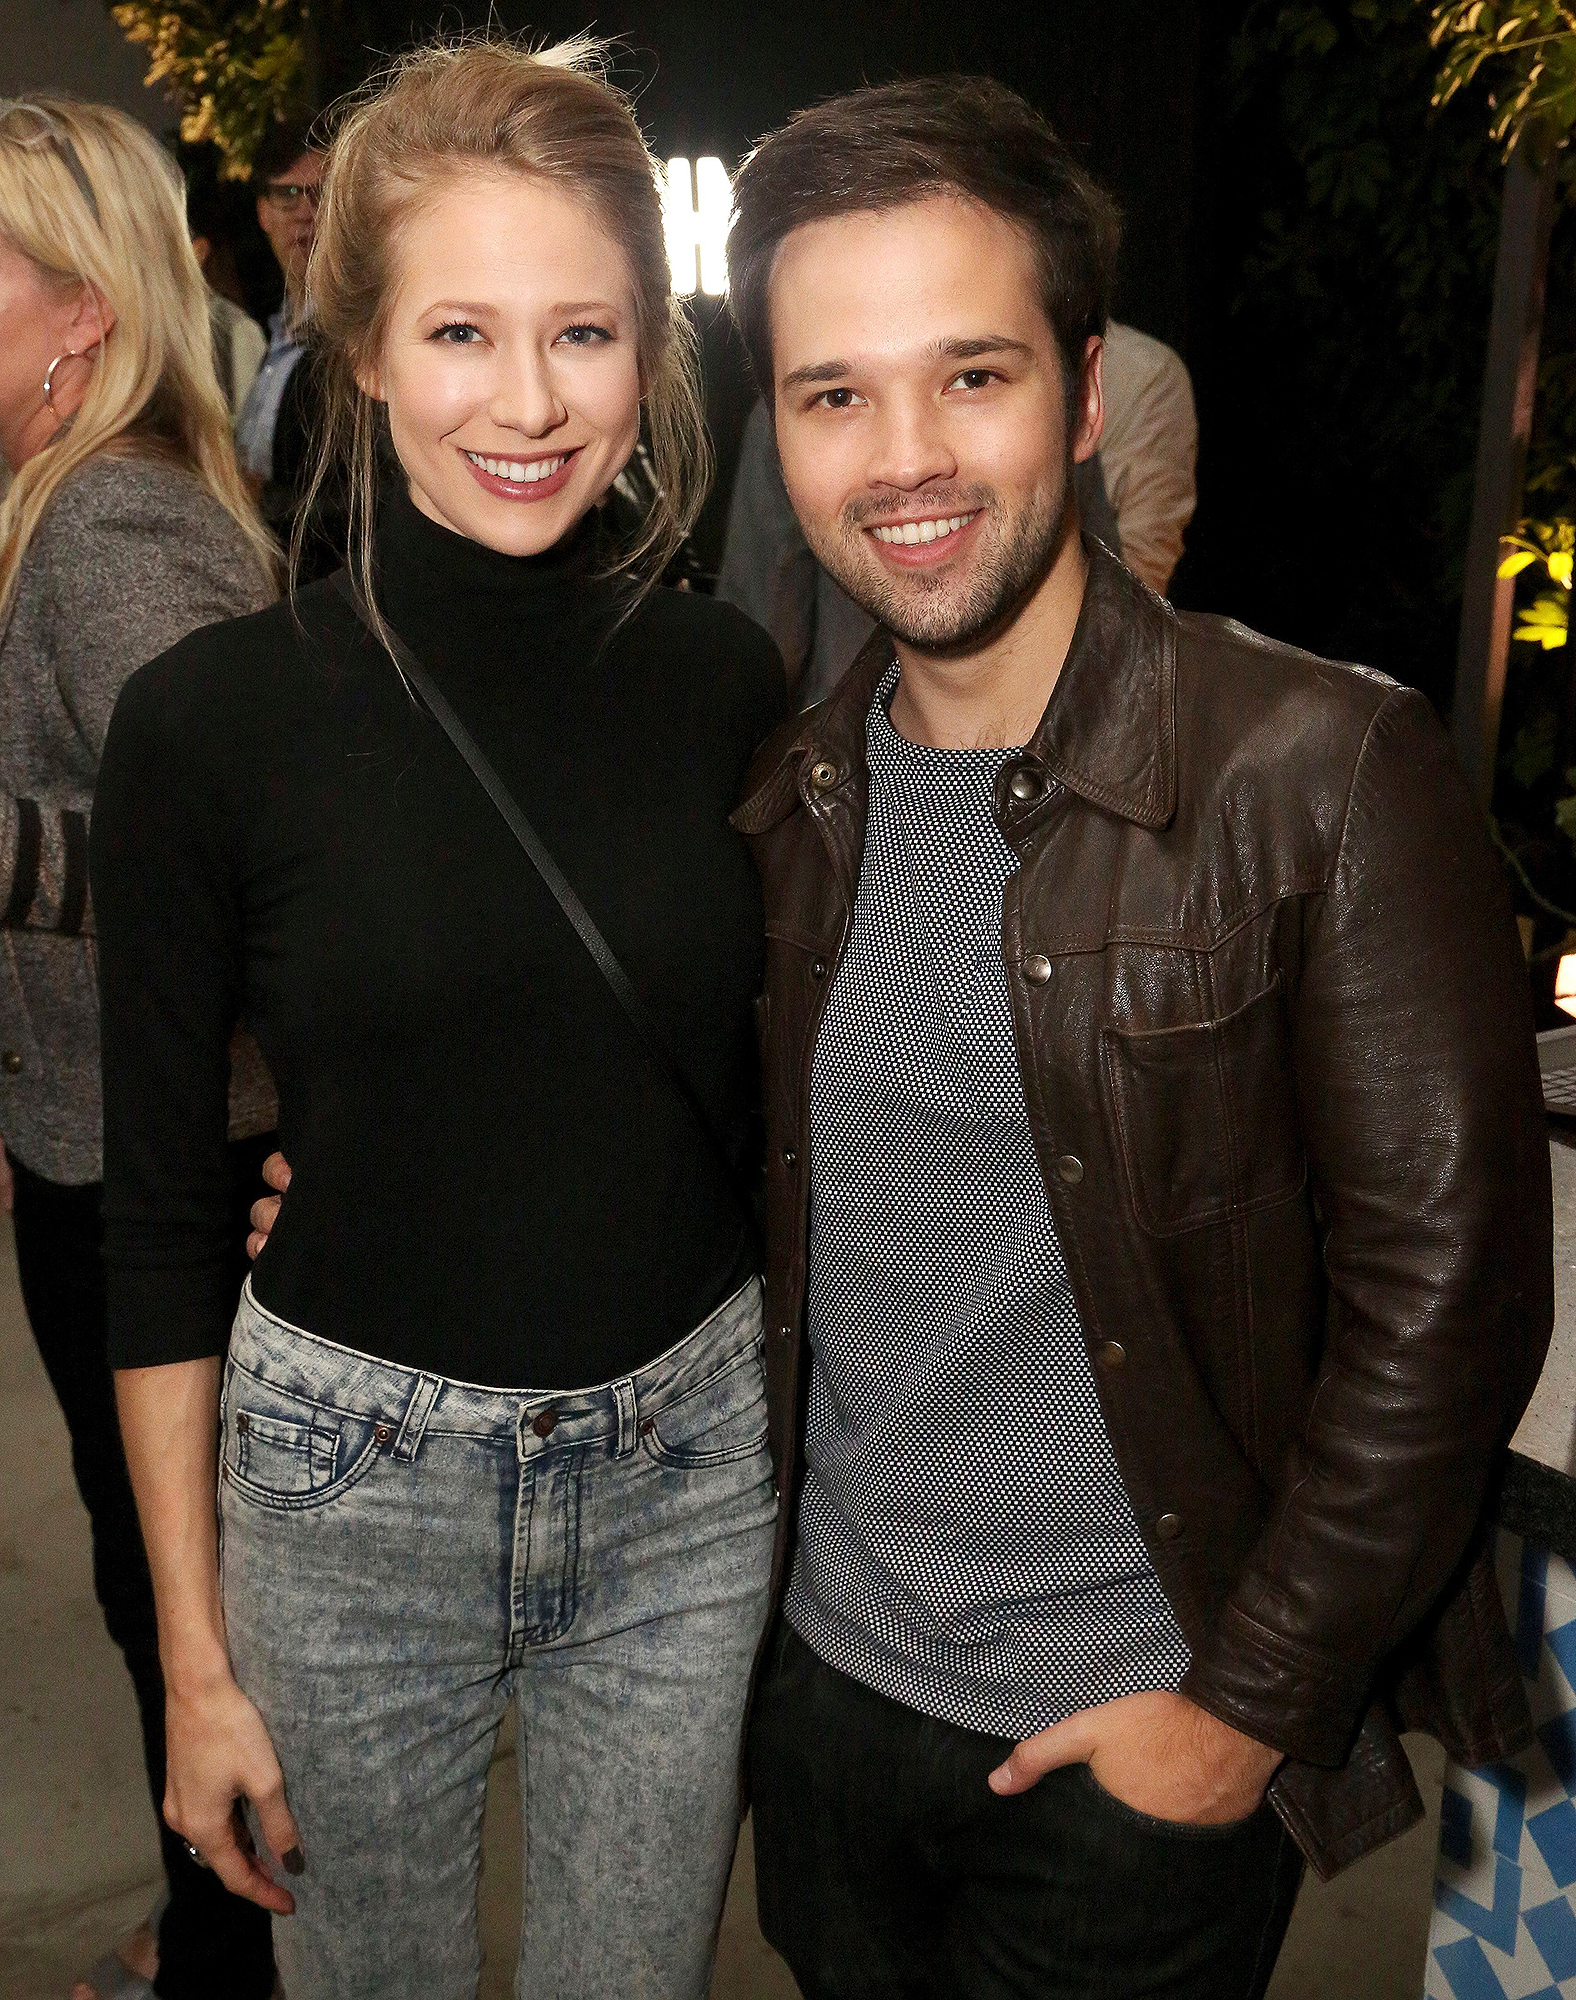 Icarly Pregnant Porn - Nathan Kress' Wife Is Pregnant With 2nd Baby After Miscarriages